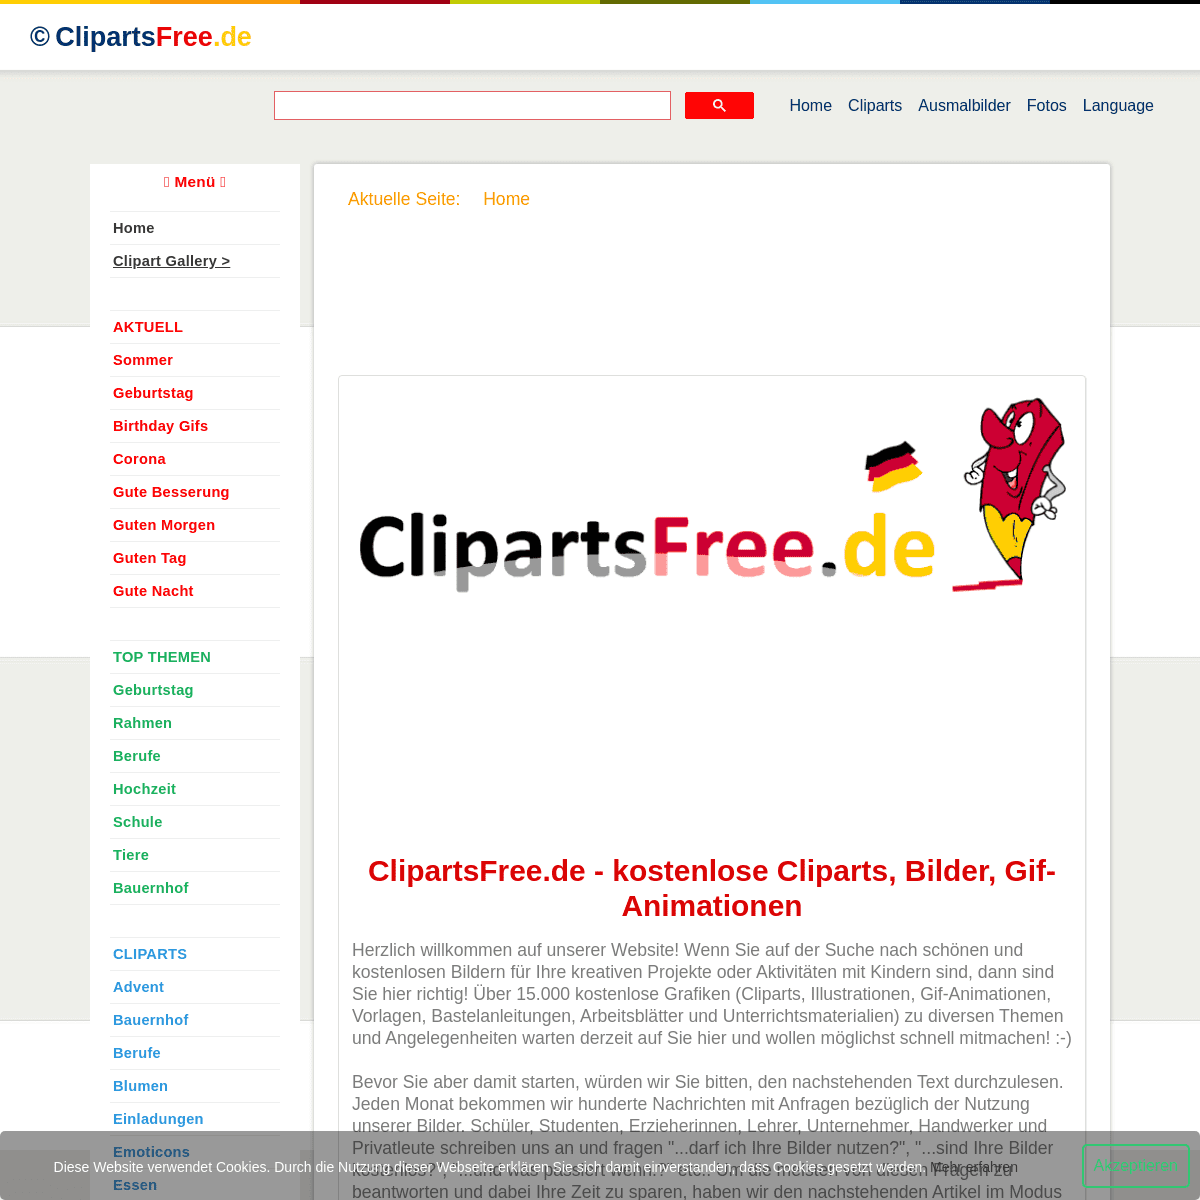 A complete backup of https://clipartsfree.de